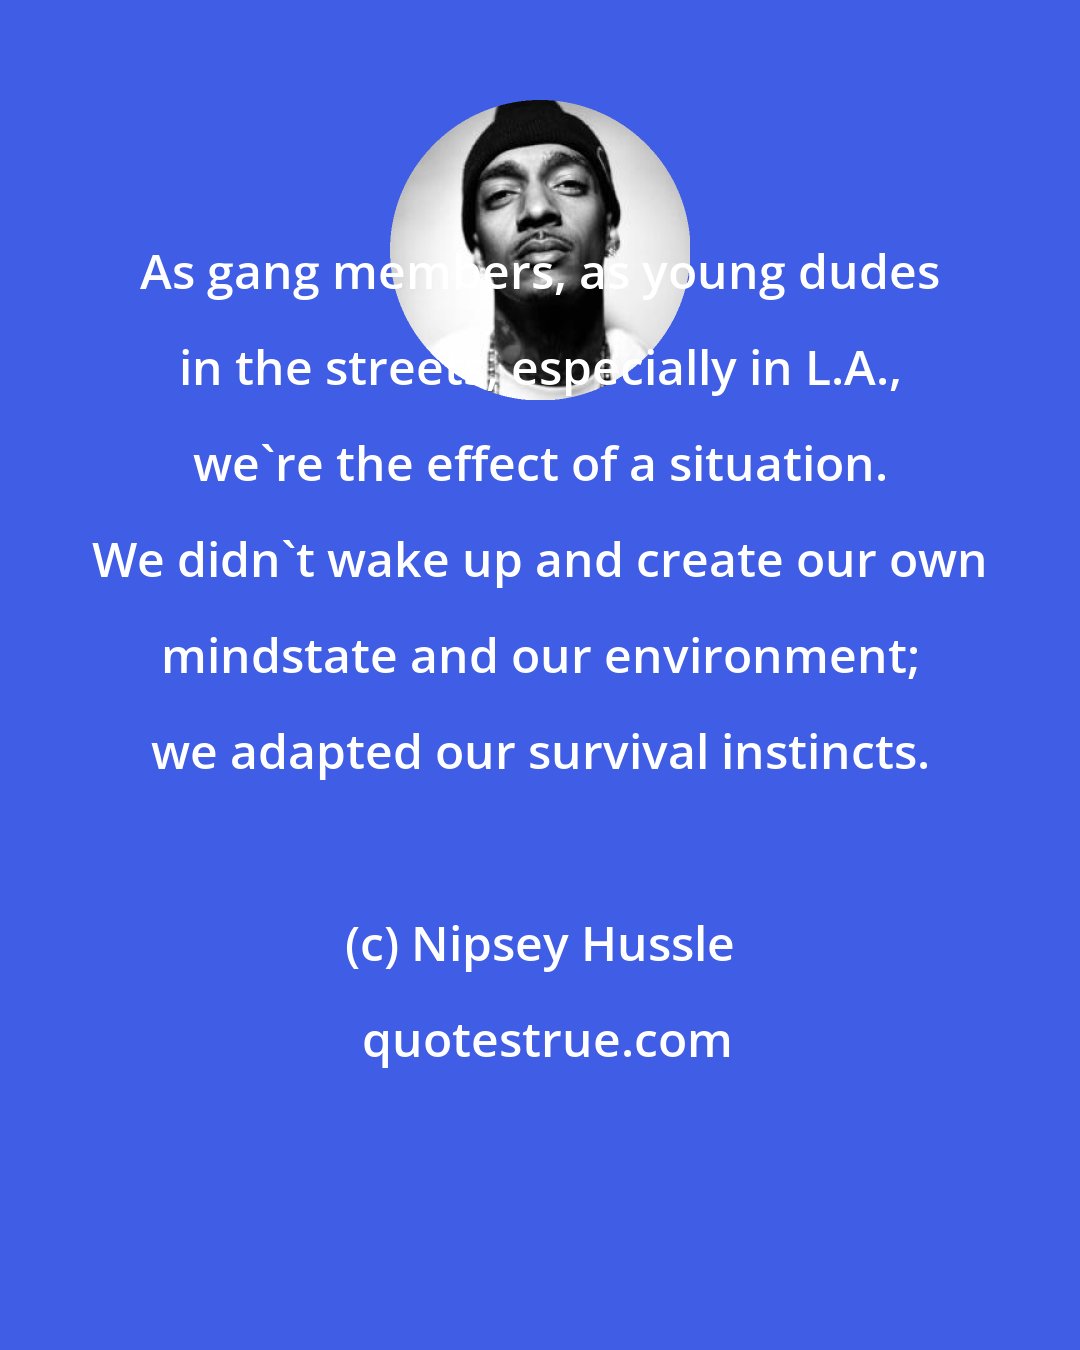 Nipsey Hussle: As gang members, as young dudes in the streets, especially in L.A., we're the effect of a situation. We didn't wake up and create our own mindstate and our environment; we adapted our survival instincts.